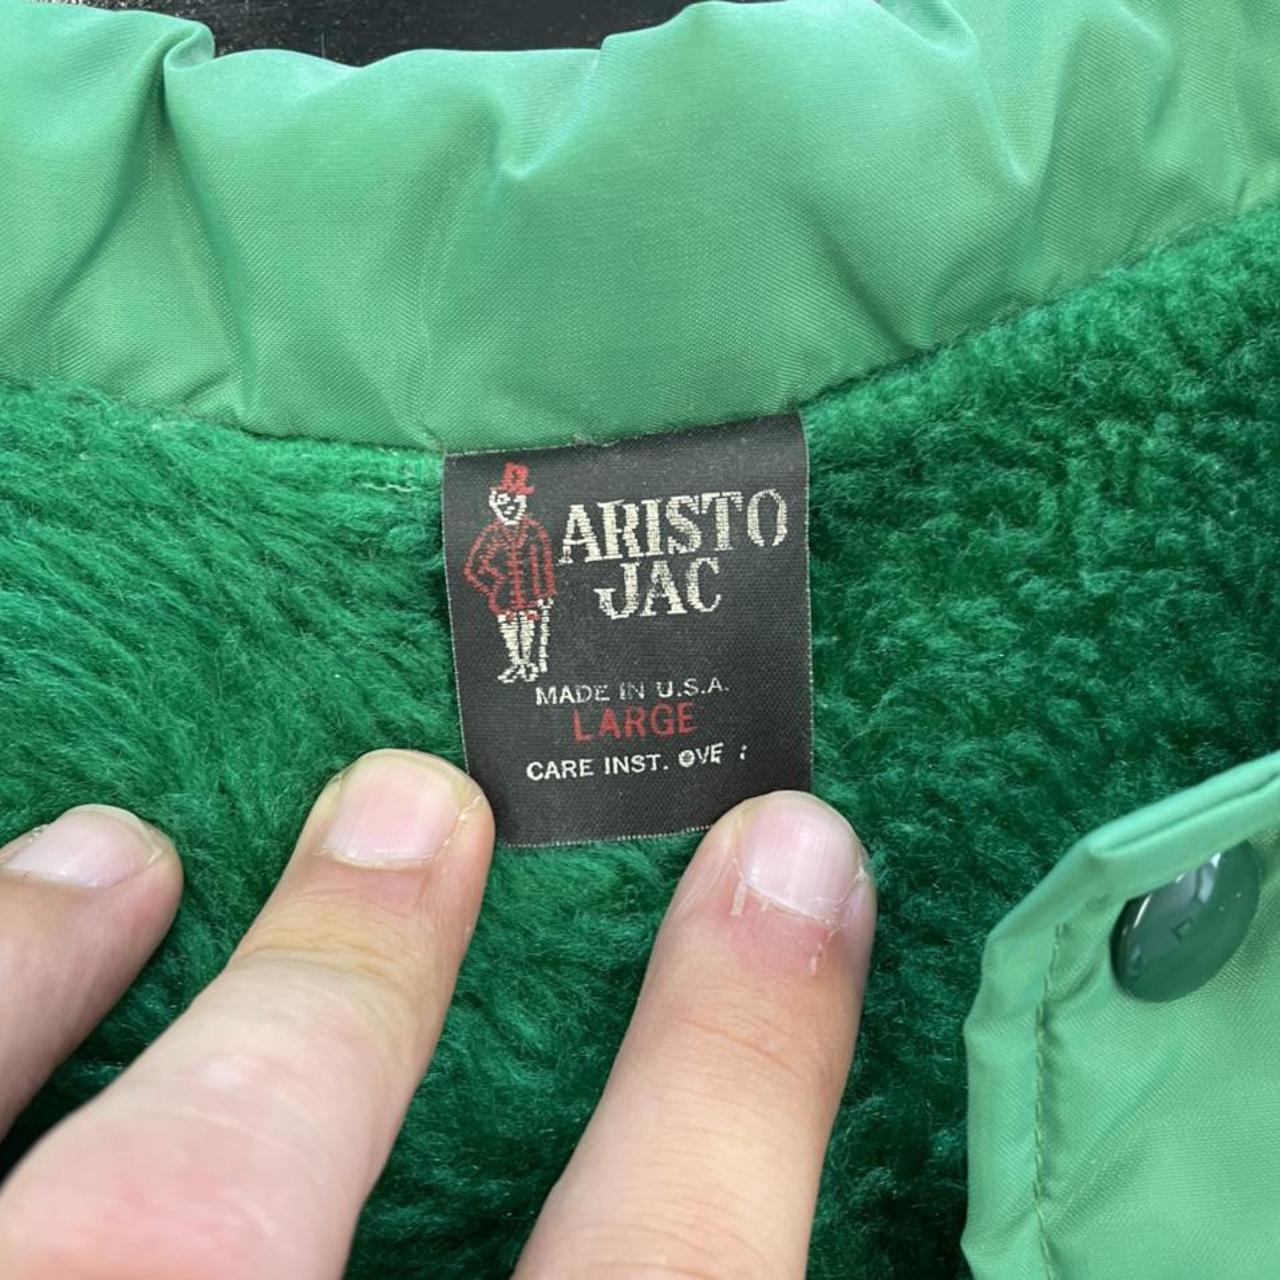 Aristoc Men's Green and White Jacket (4)